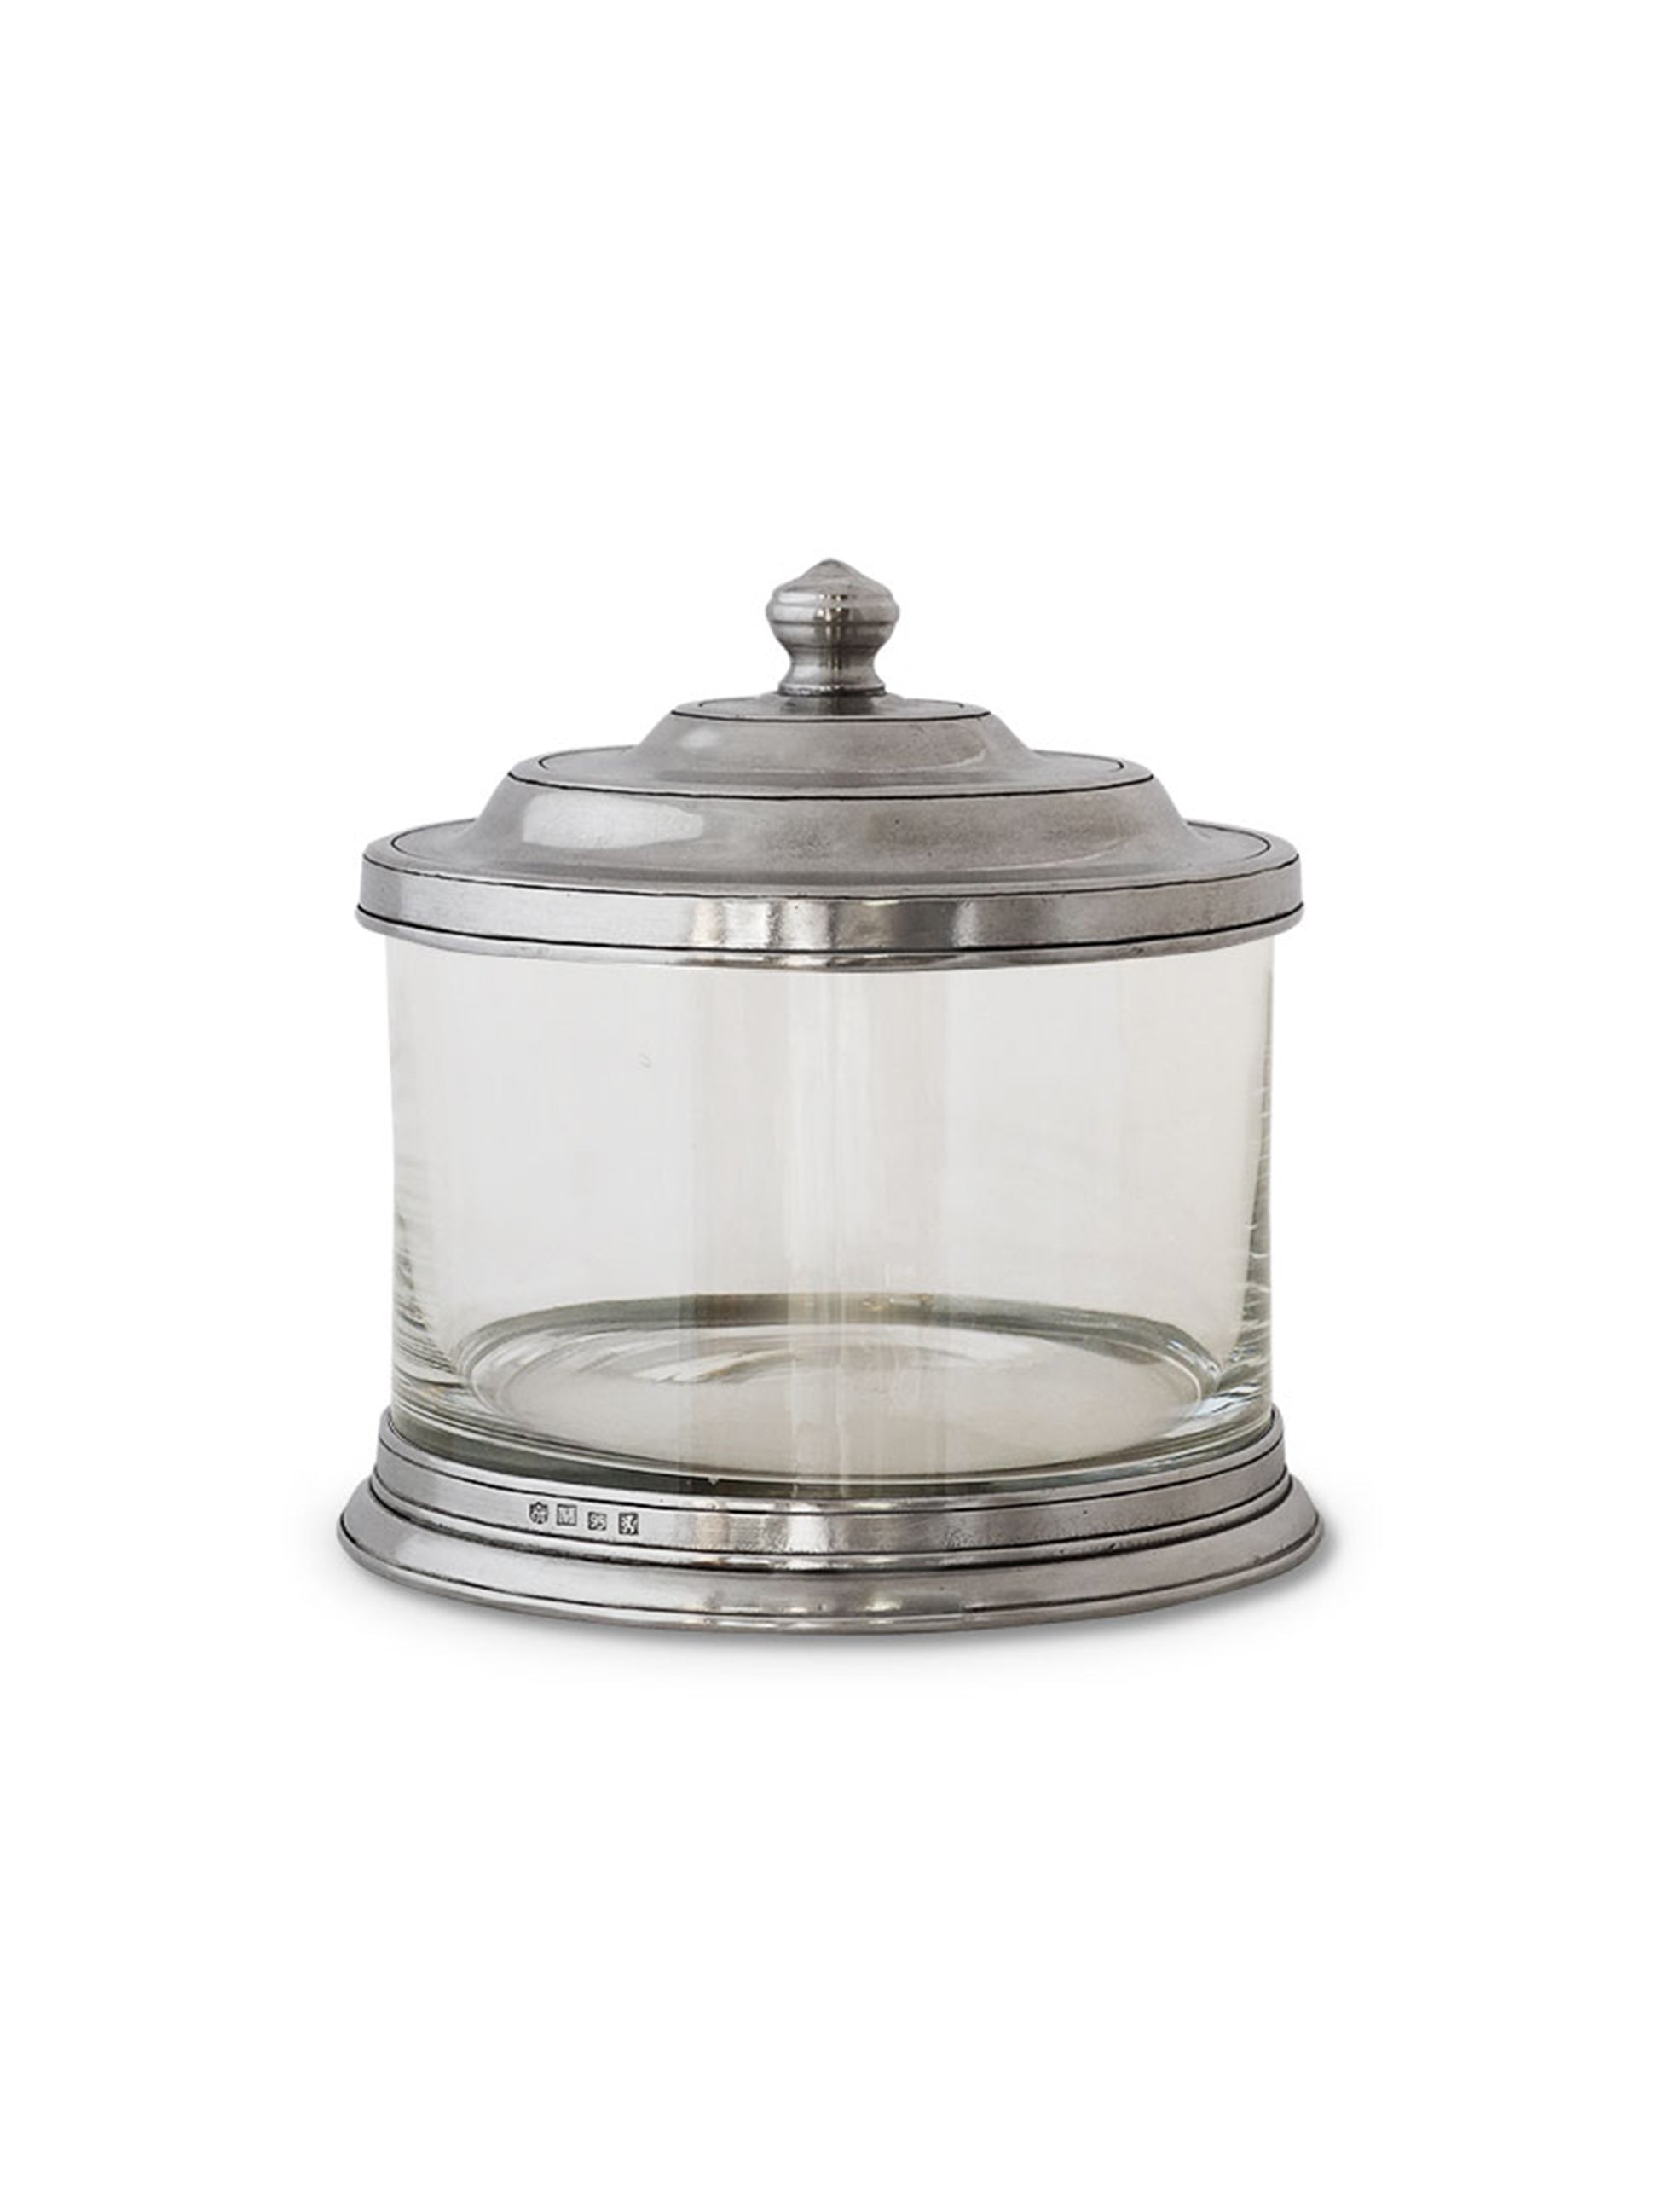 https://westontable.com/cdn/shop/products/MATCH-Pewter-Glass-Cookie-Jar-Weston-Table.jpg?v=1590433504&width=1946